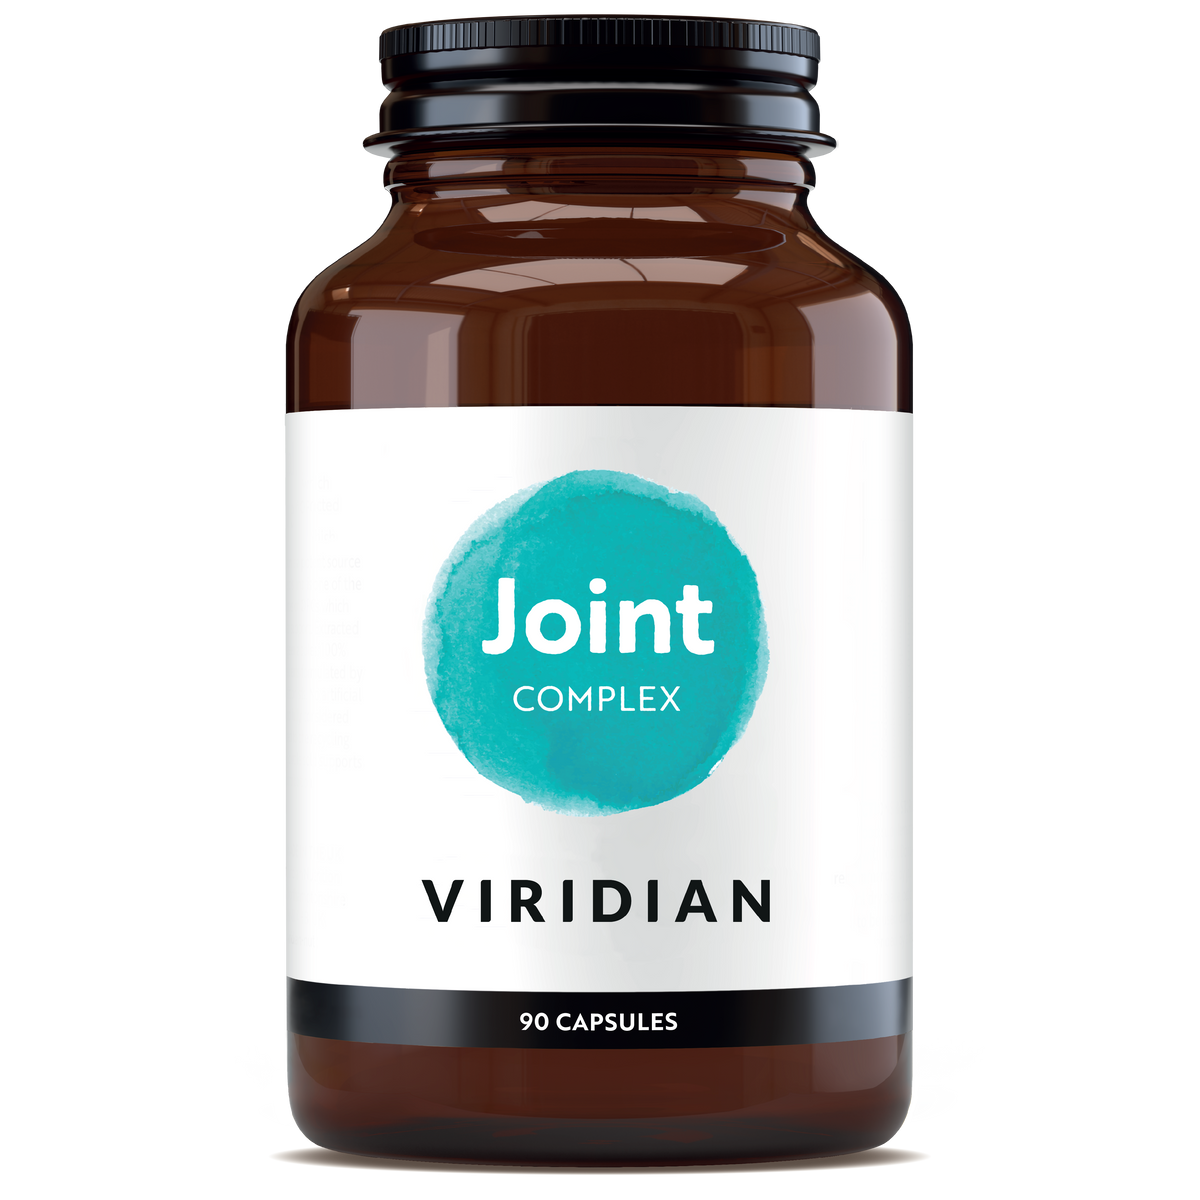 Viridian Joint Complex Veg Caps - 90's - Your Health Store